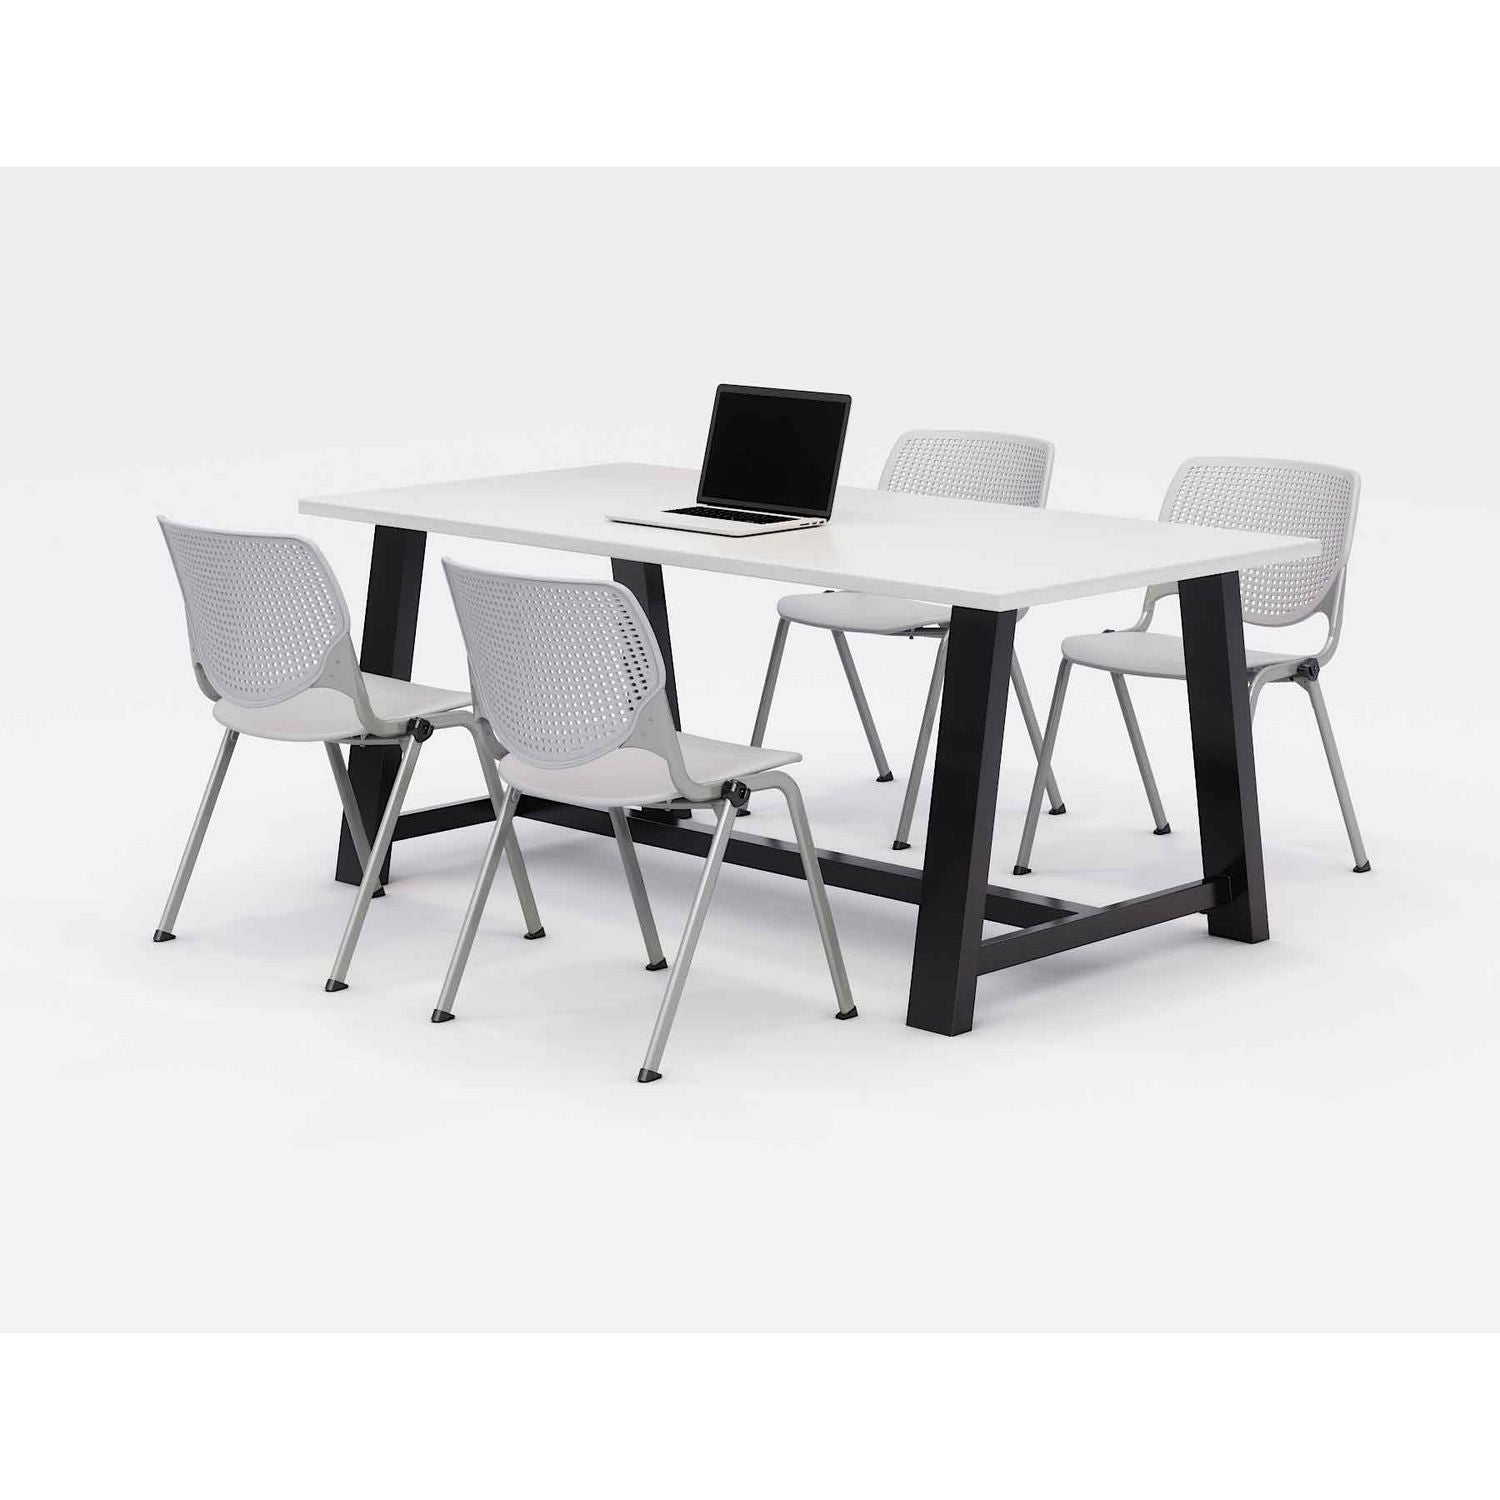 midtown-dining-table-with-four-light-gray-kool-series-chairs-36-x-72-x-30-designer-white-ships-in-4-6-business-days_kfi840031900296 - 1